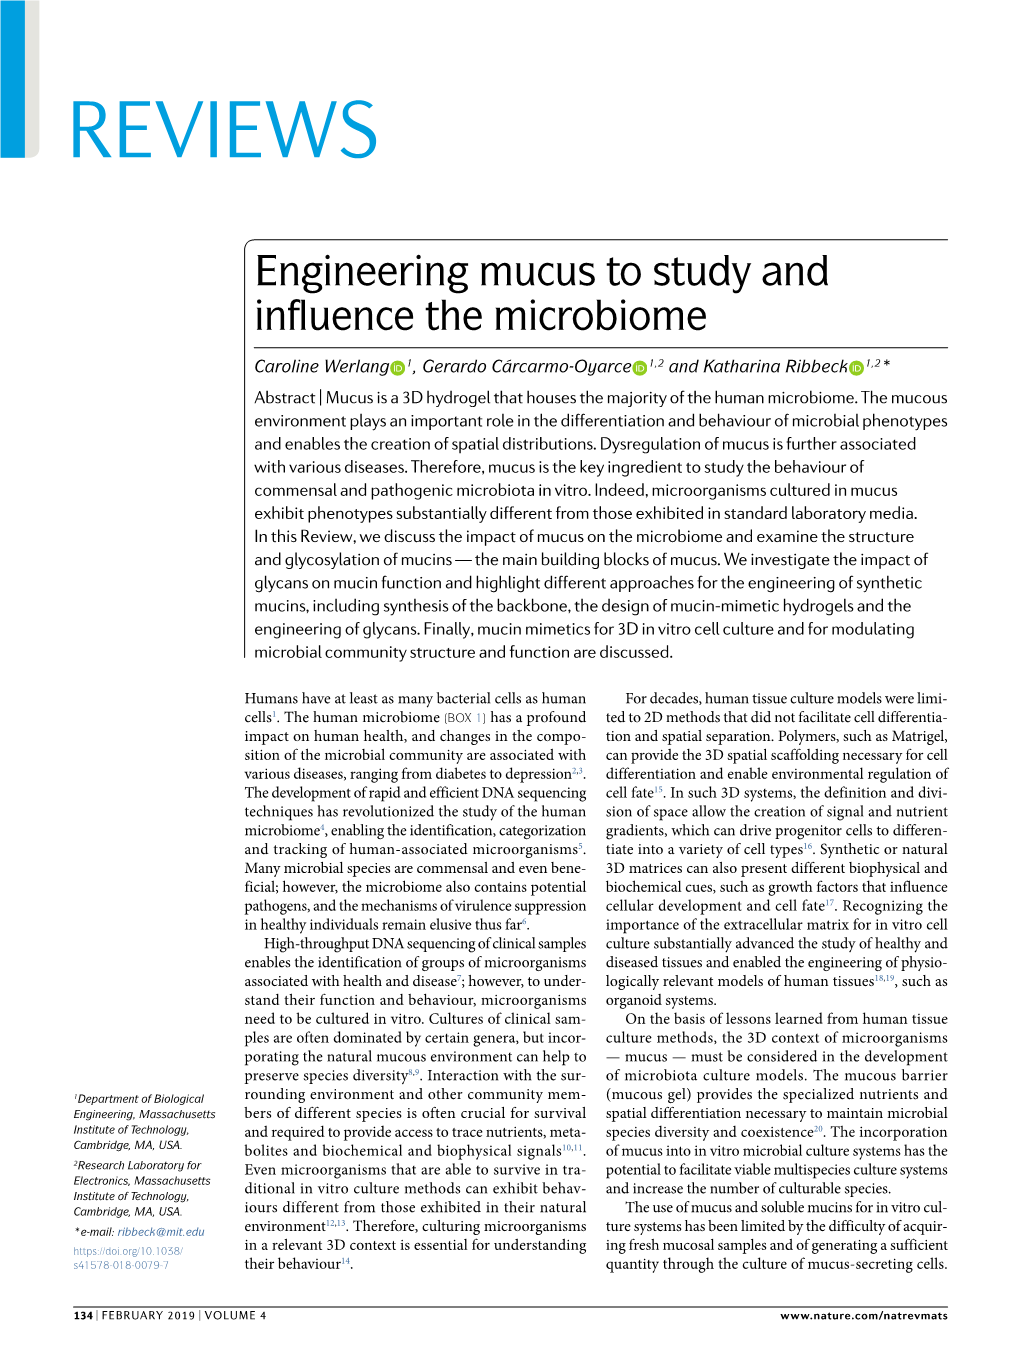 Engineering Mucus to Study and Influence the Microbiome